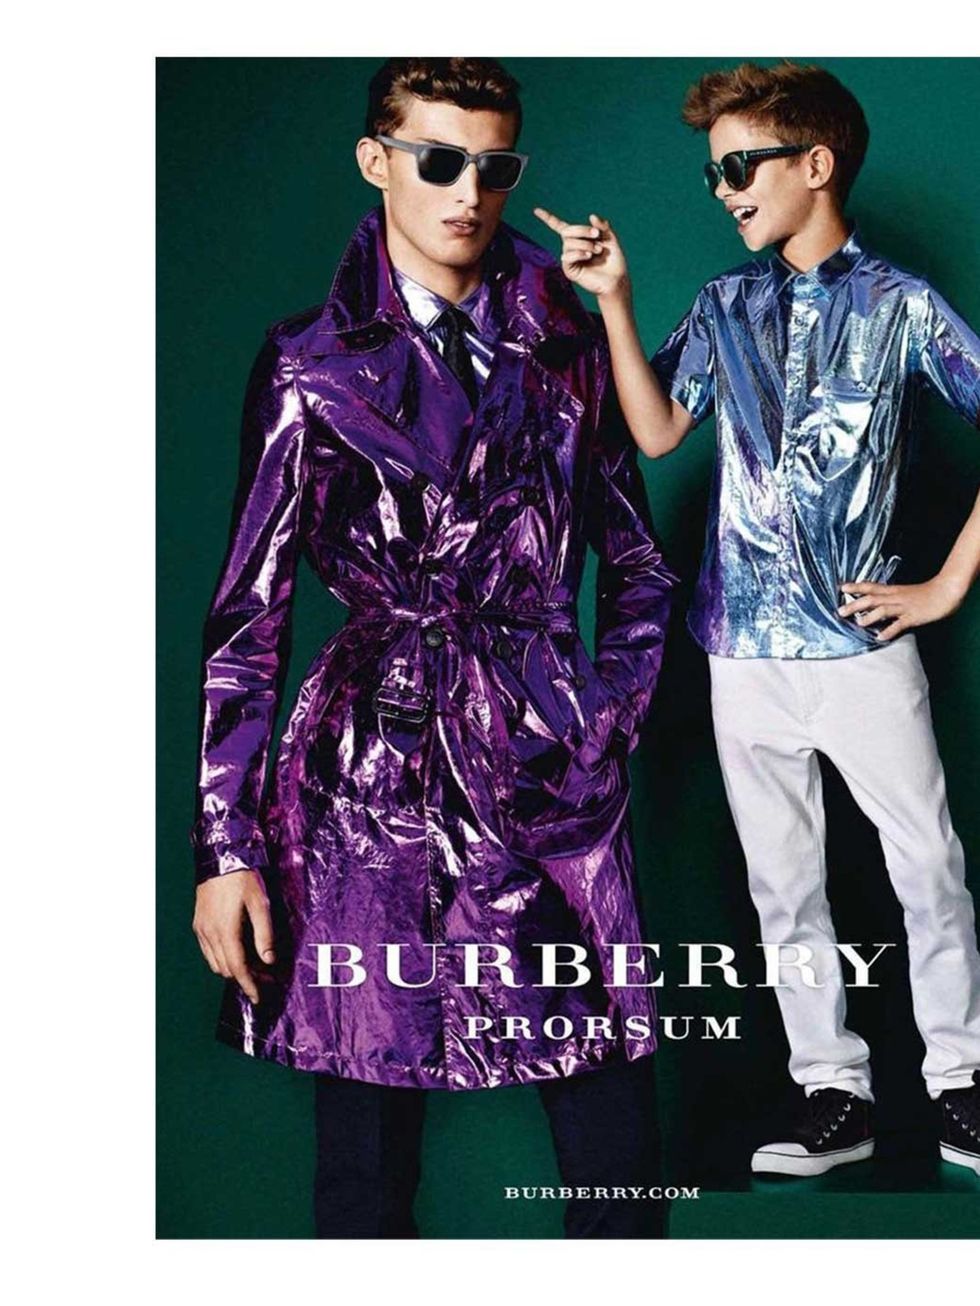 <p>Romeo Beckham for Burberry's spring/summer 2013 campaign. Cheeky and charming  it's hard not to smile at Romeo's Burberry ads. An icon at only 10 years old? Well he is a Beckham, after all...</p>